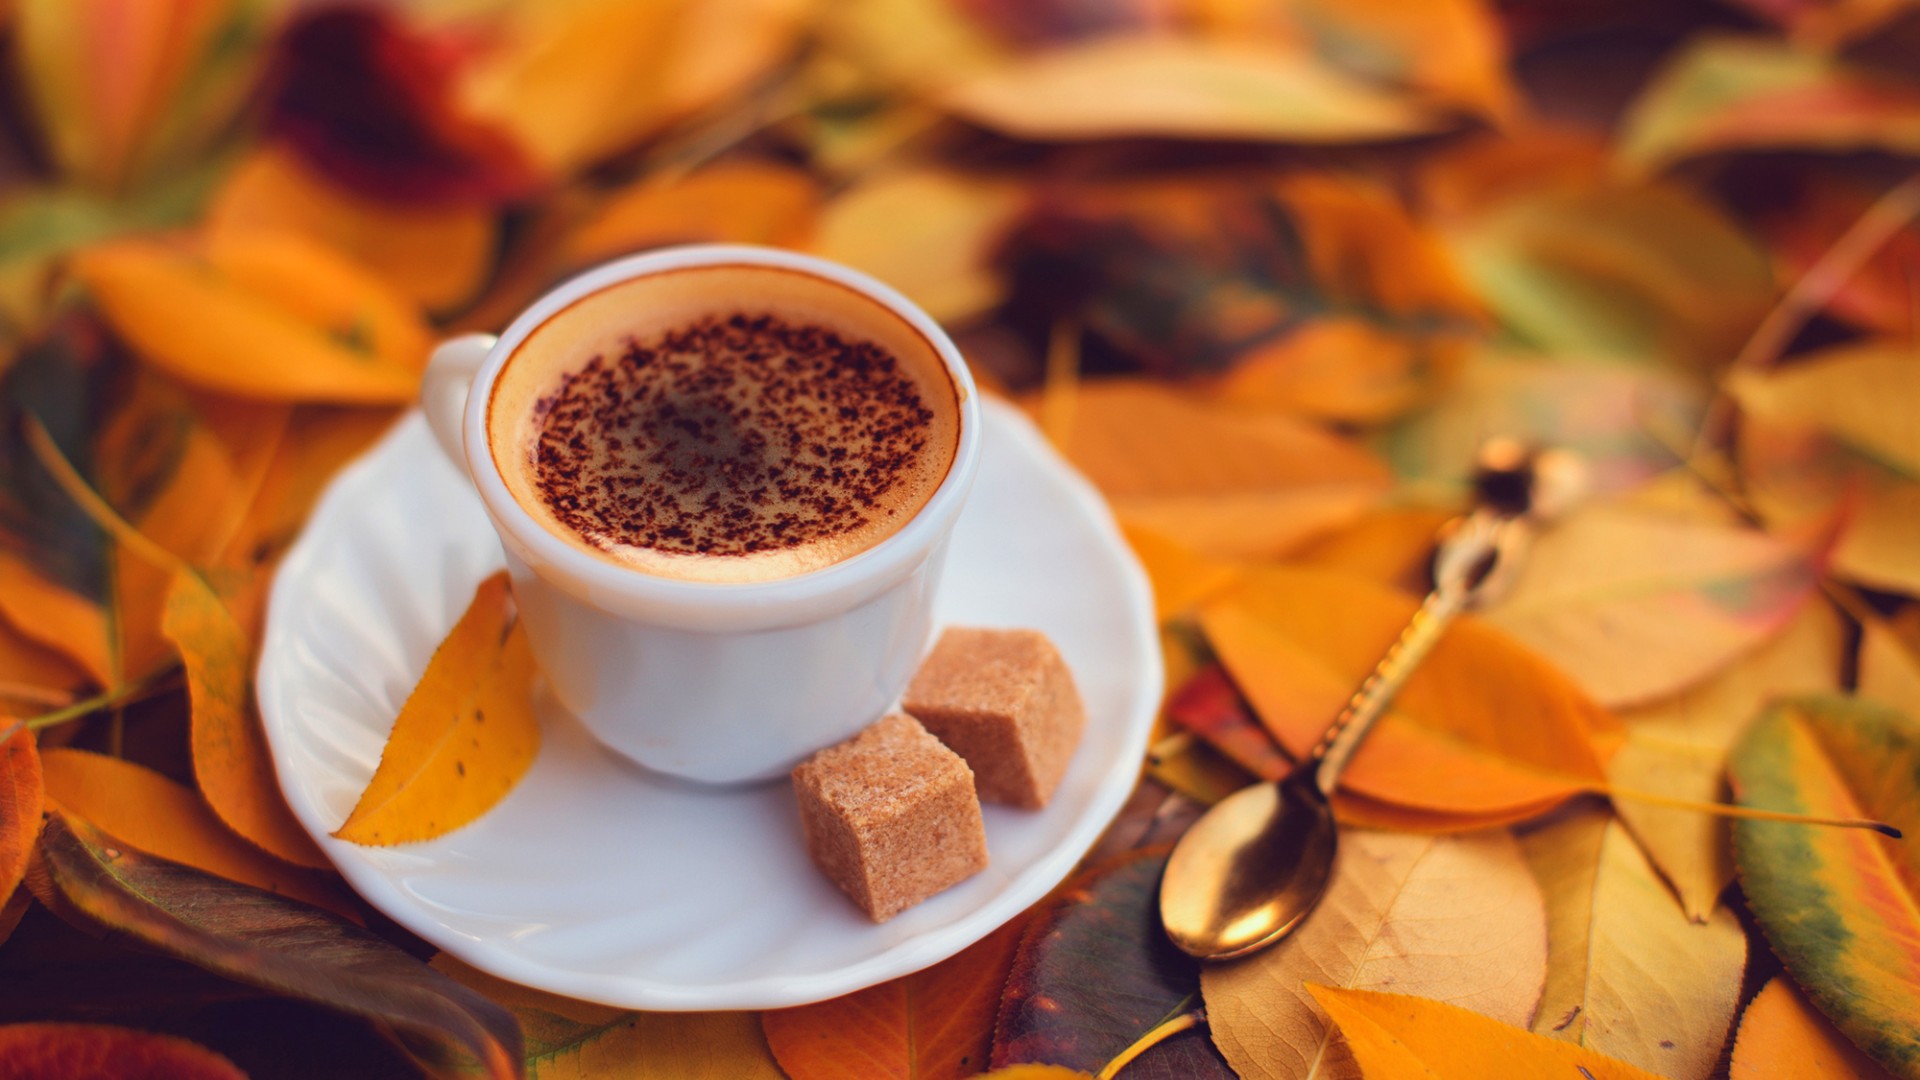 Download Wallpaper autumn coffee cup leaves sugar spoon, 1920x Coffee and autumn